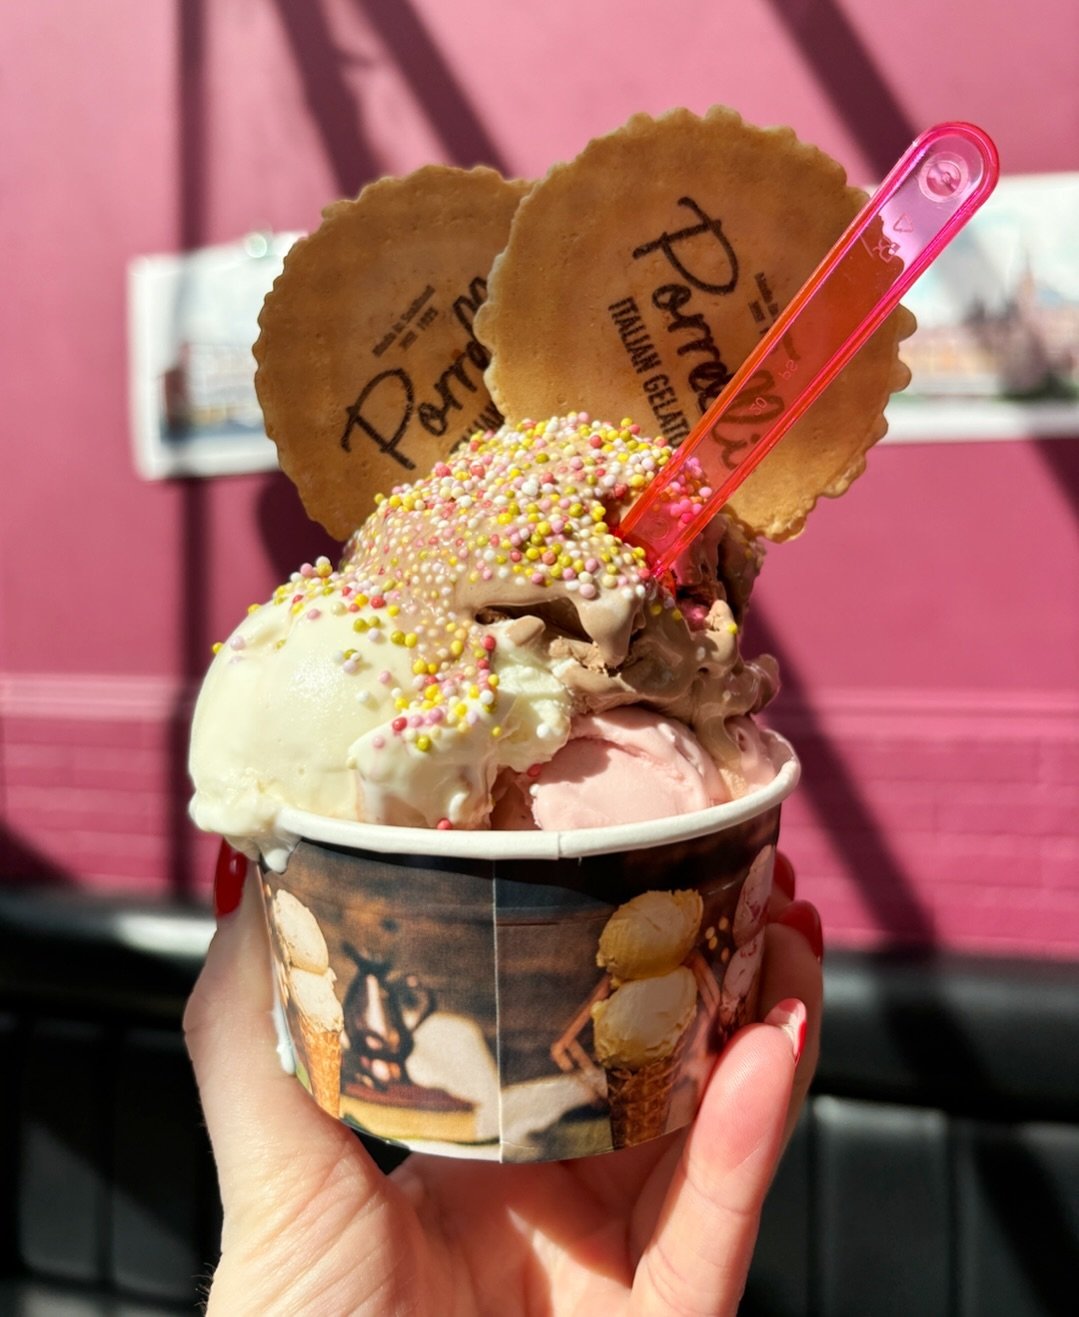 Singl-scoop? Nah we&rsquo;ll have a triple! We&rsquo;re serving up ice cream - in cones or tubs - all weekend. 

Available for sit in or takeaway 🌞🍦

#brunch #brunchglasgow #glasgowfood #glasgowcafe #glasgowbakery #singlend #breakfast #breakfastgla